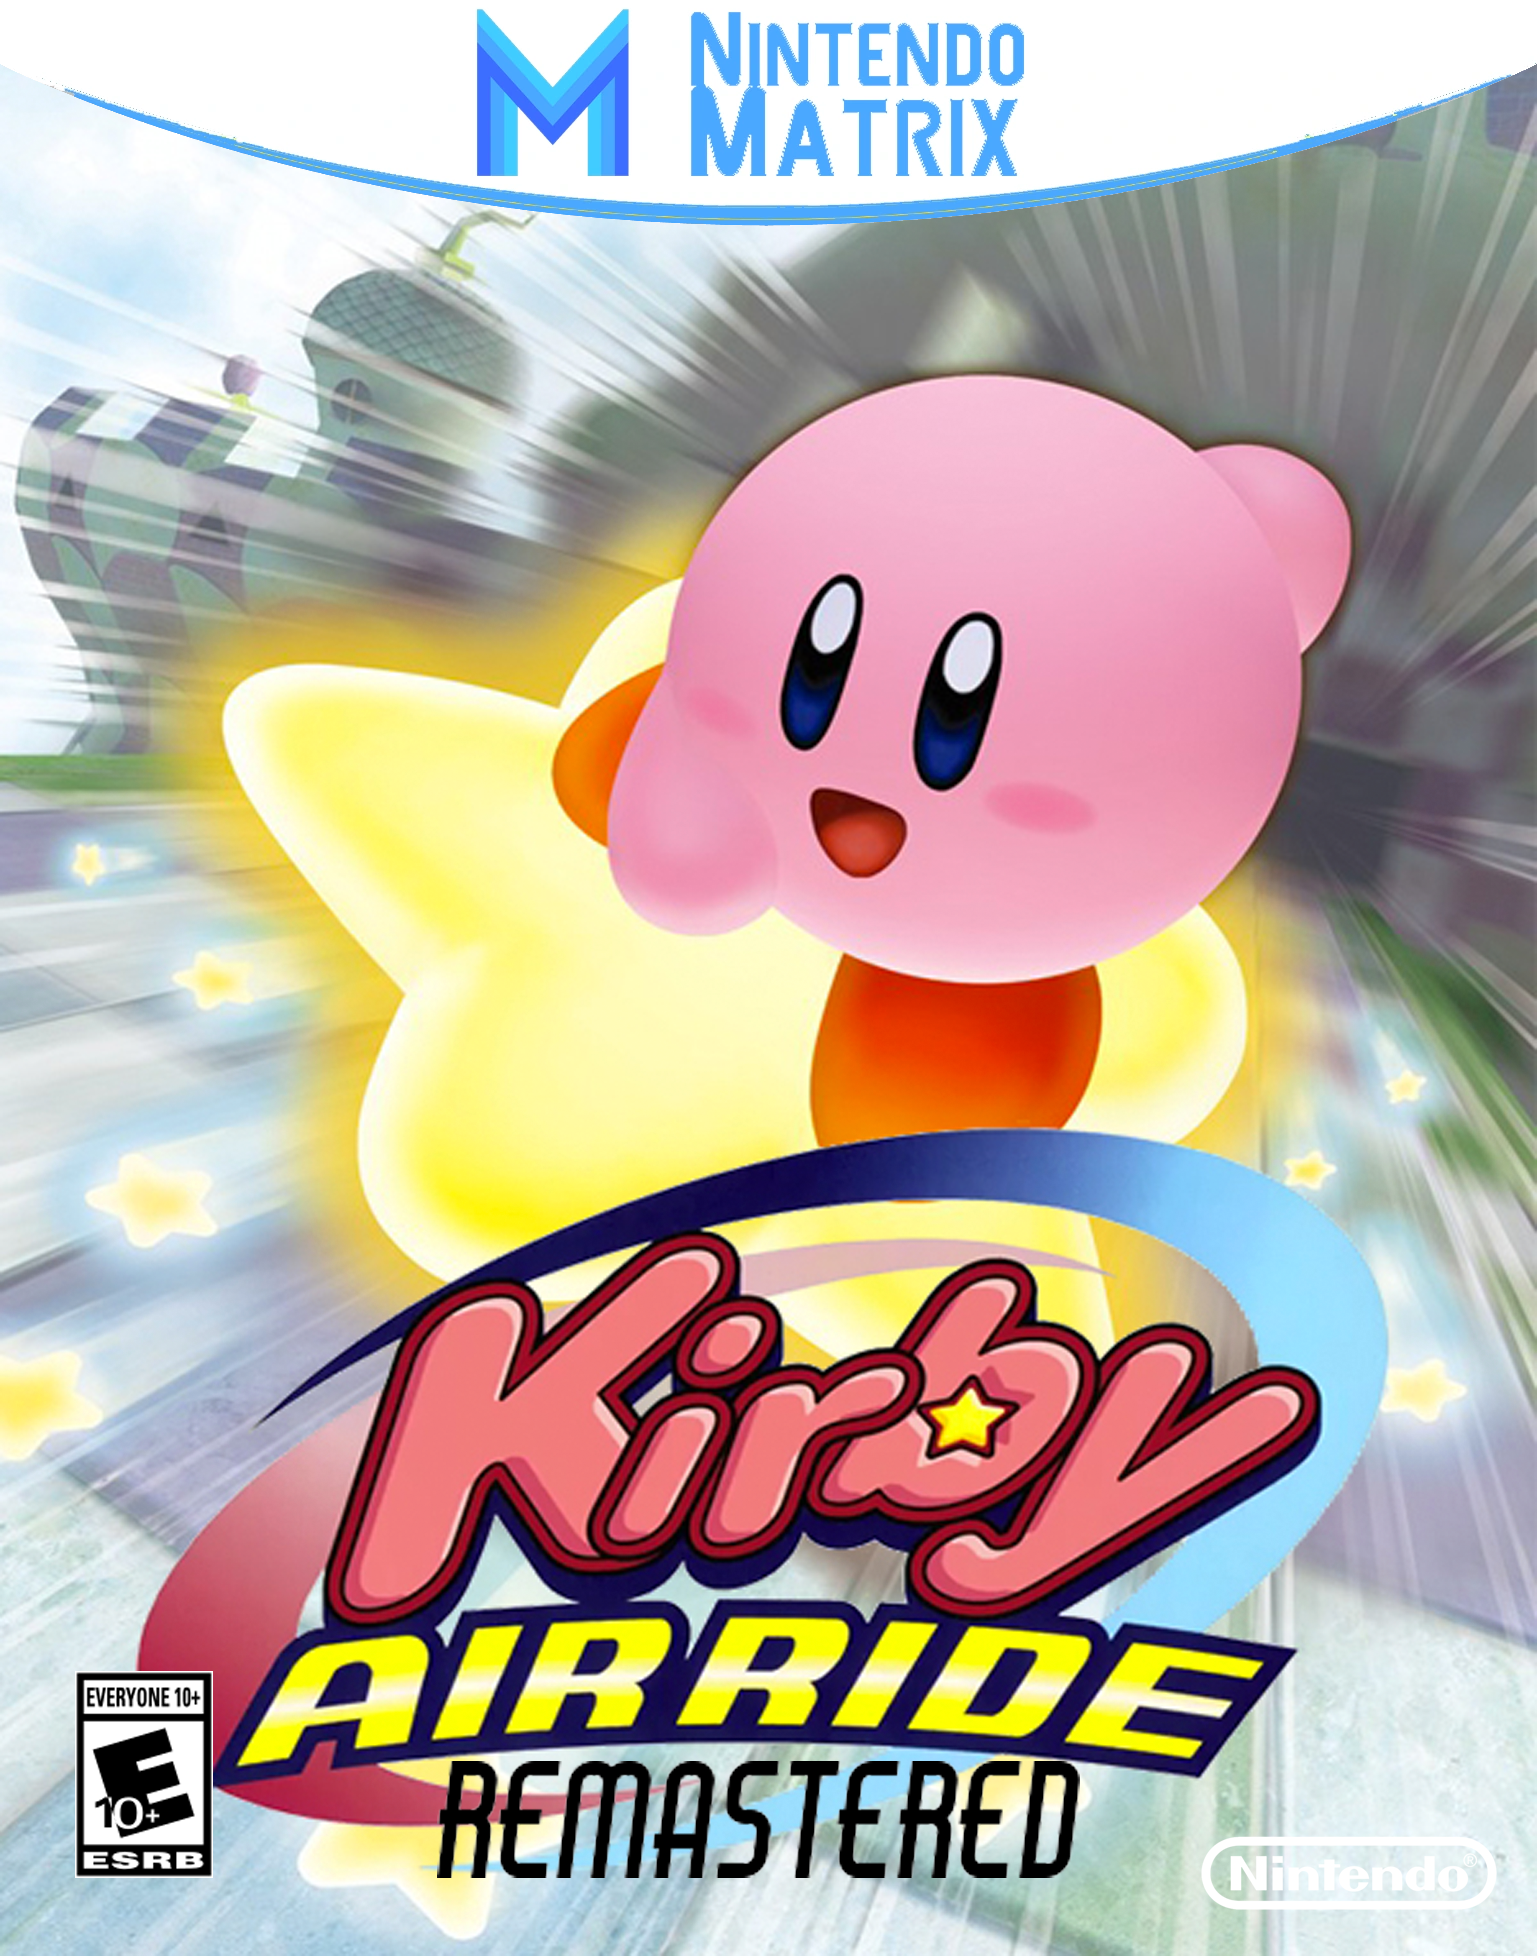 Kirby's Egg-Cellent Adventure, Kirby Wiki